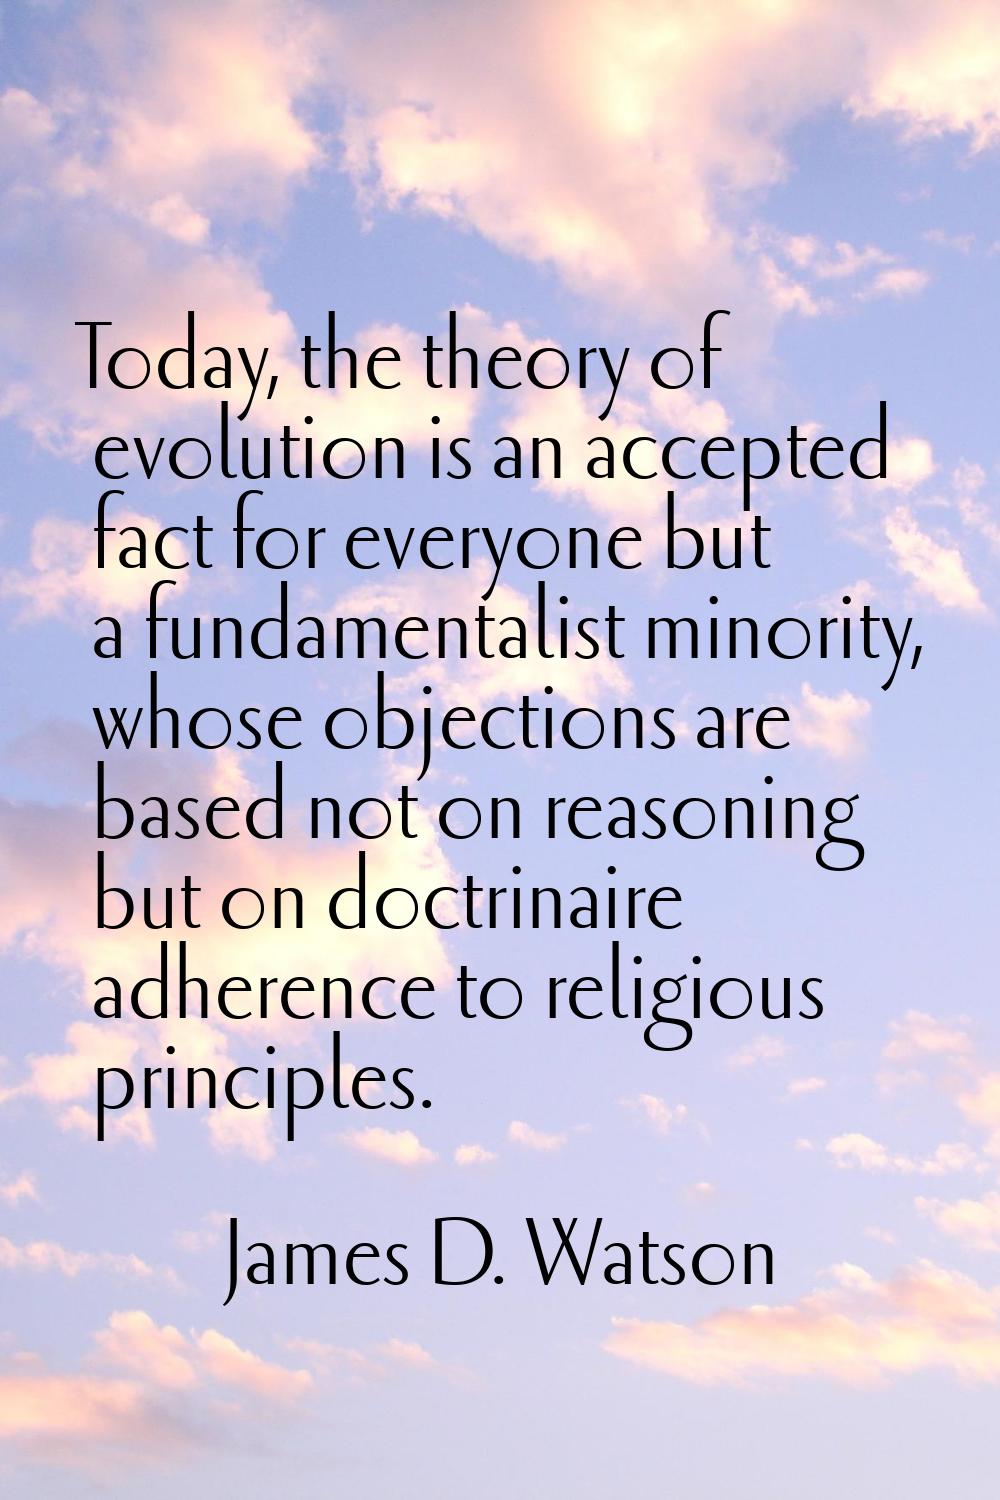 Today, the theory of evolution is an accepted fact for everyone but a fundamentalist minority, whos